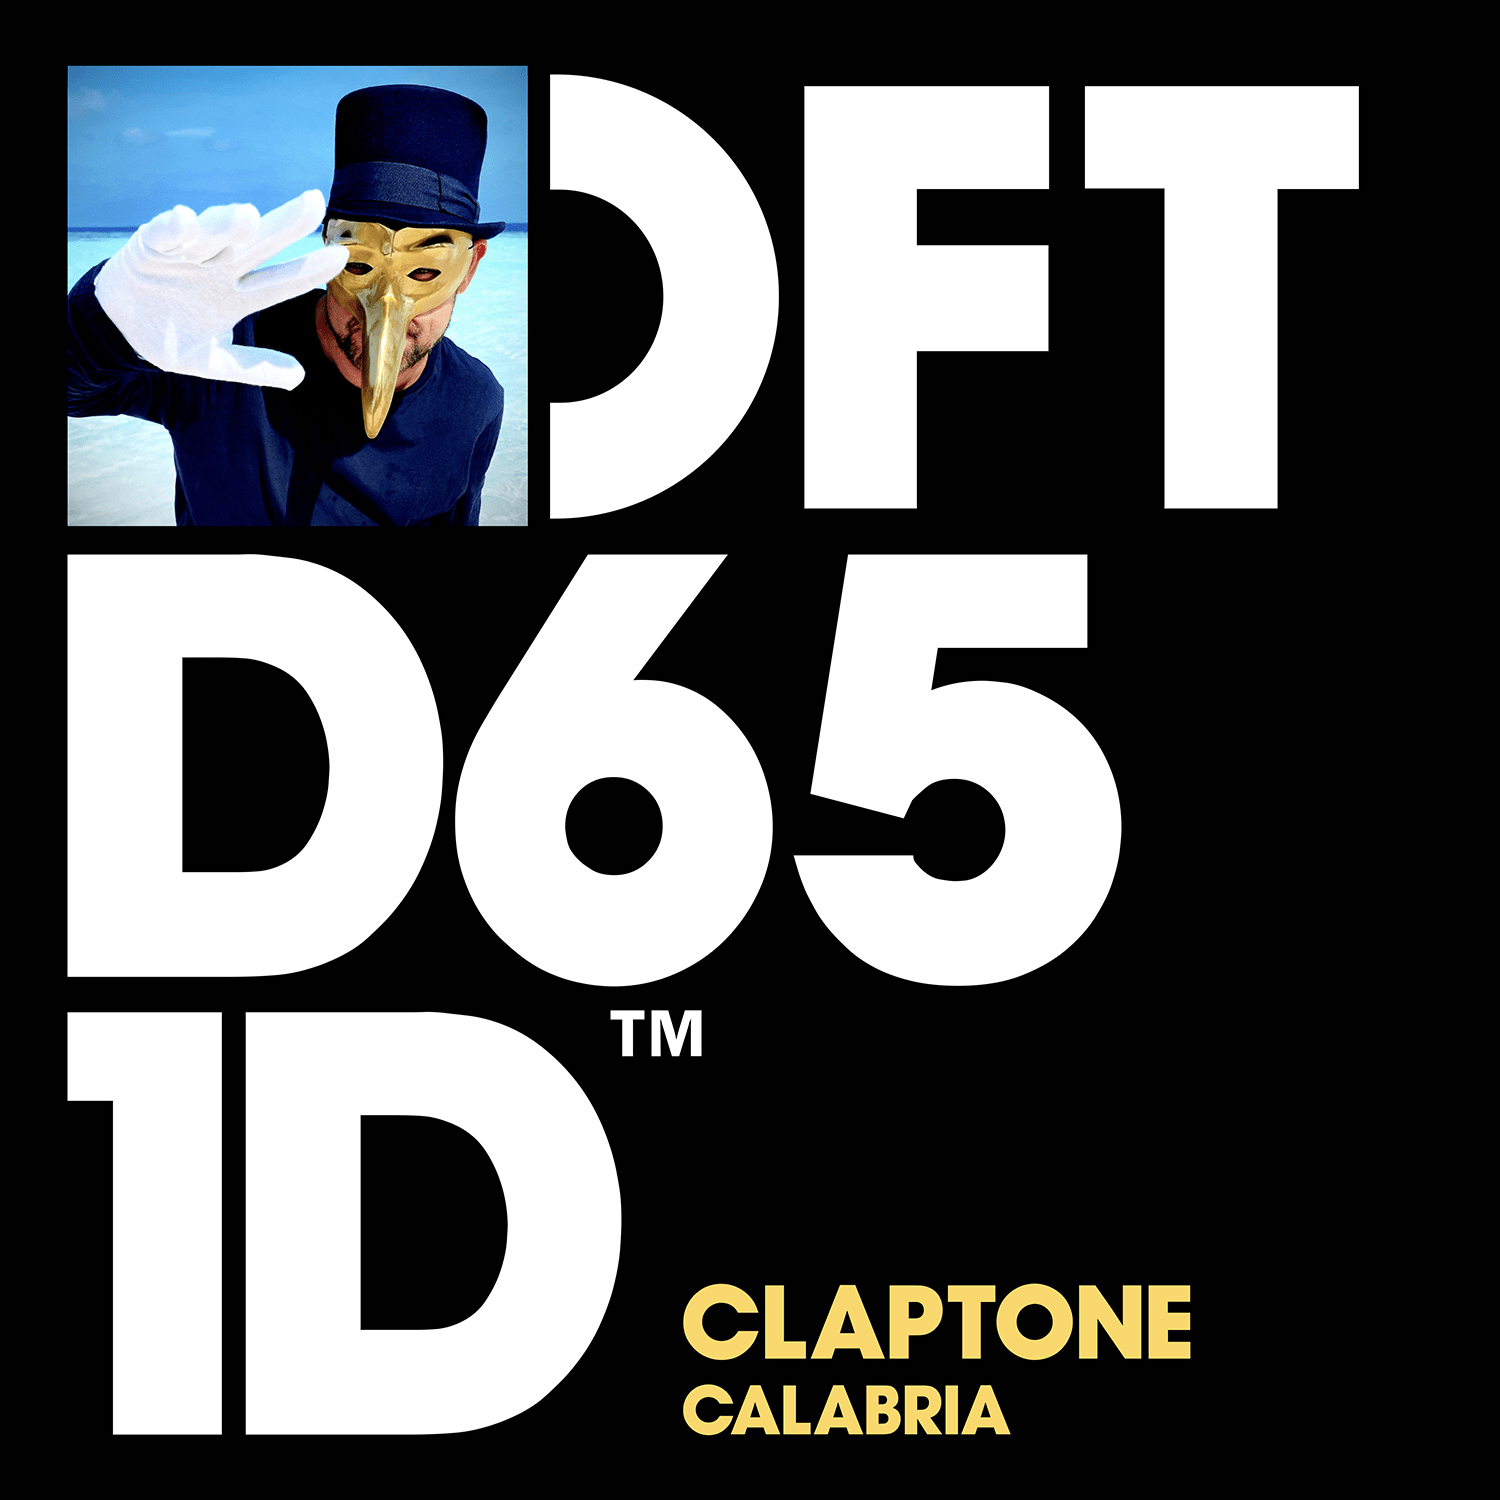 Claptone debuts on Defected with one of summers most in-demand records ‘Calabria’